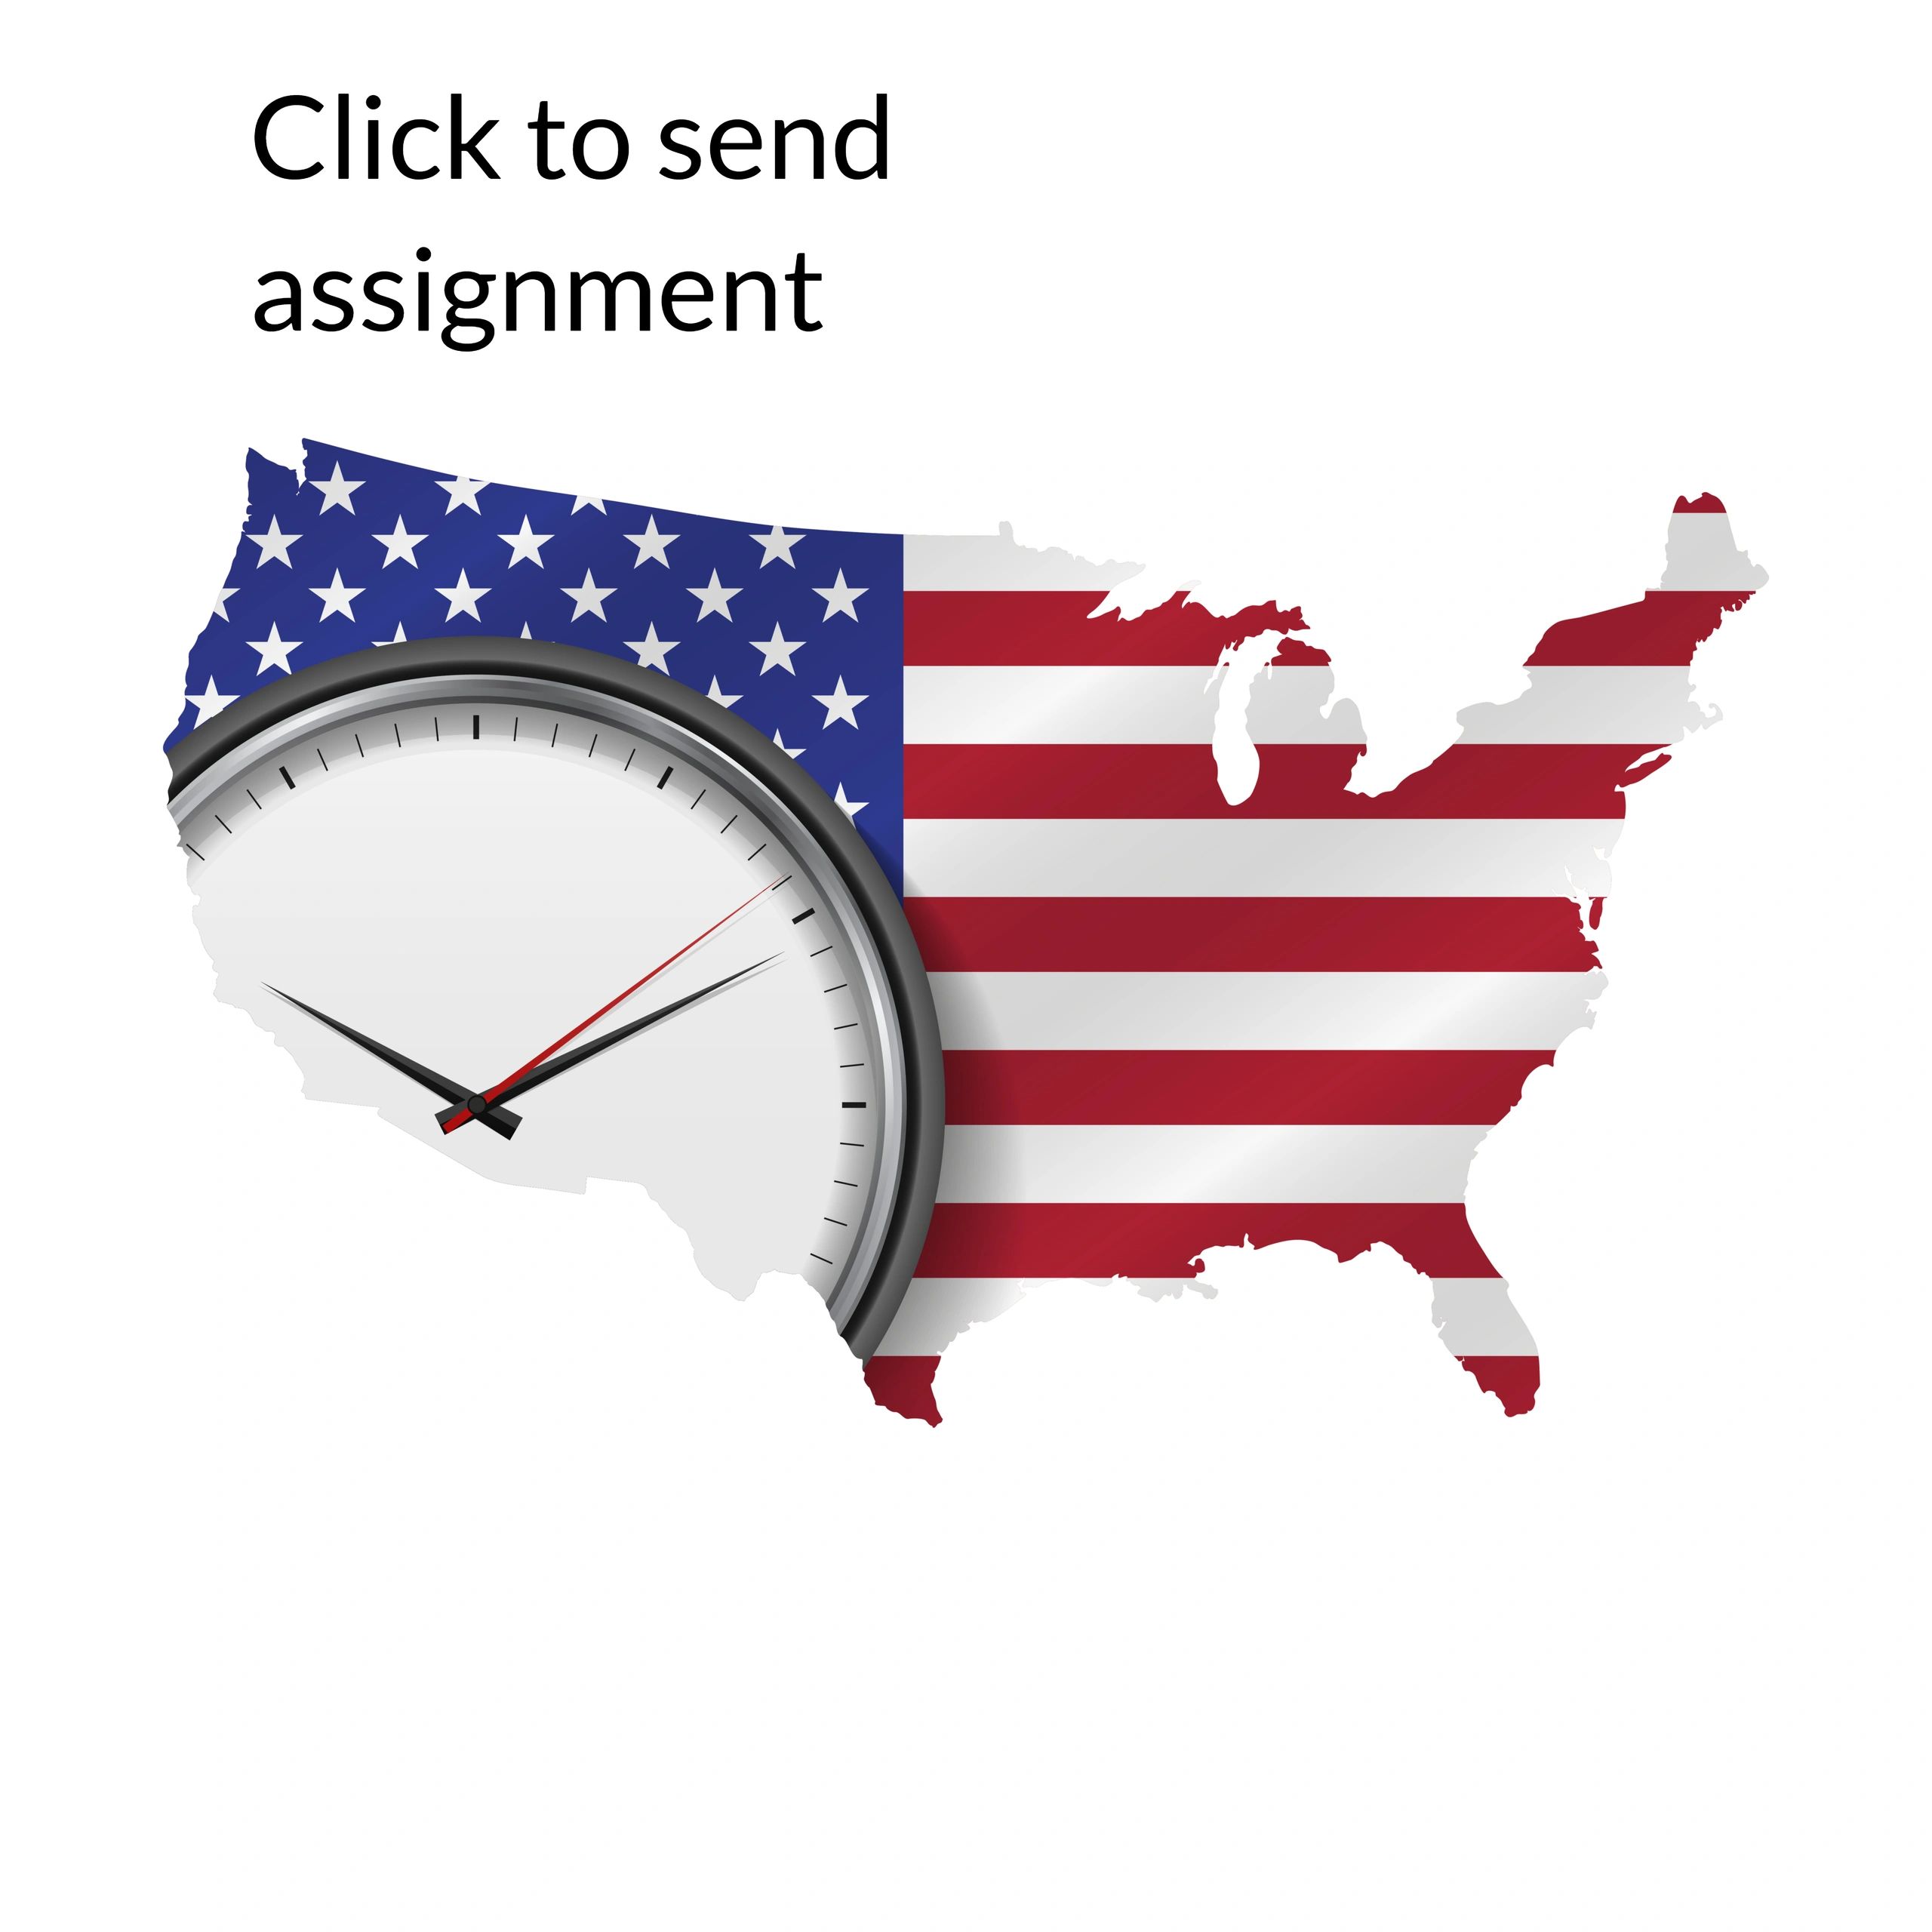 Send Assignment Click Here!